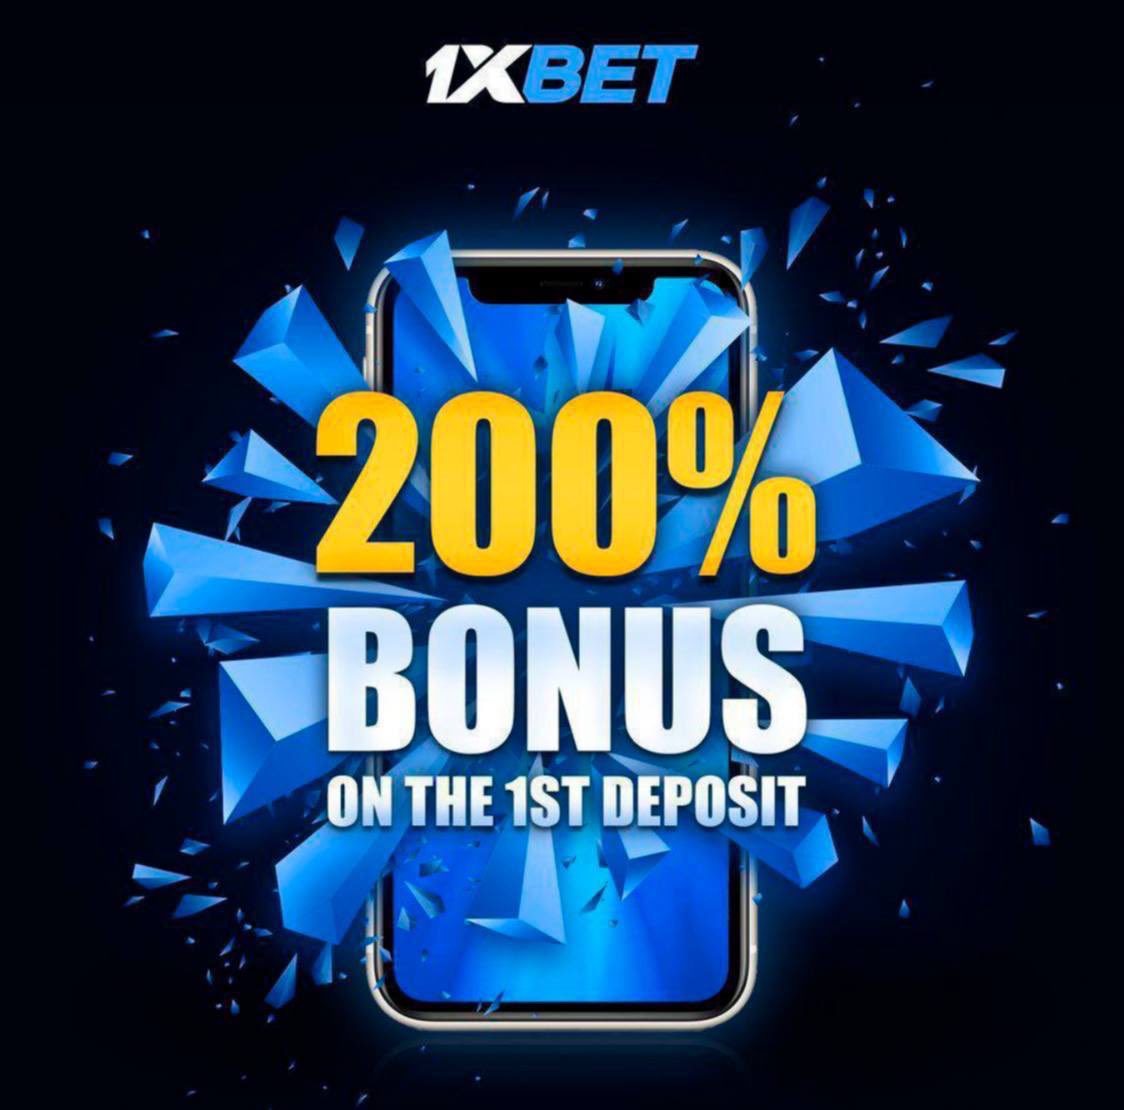 With more than 70 points will arsenal continue to win the league , well 1XBET gives you a chance to place a bet via clcr.me/99vmHQ & get 200% bonus today.
Use promocode :MAXON10
Vera
Rigathi Gachagua 
#DjFatxo 
Winnie Odinga